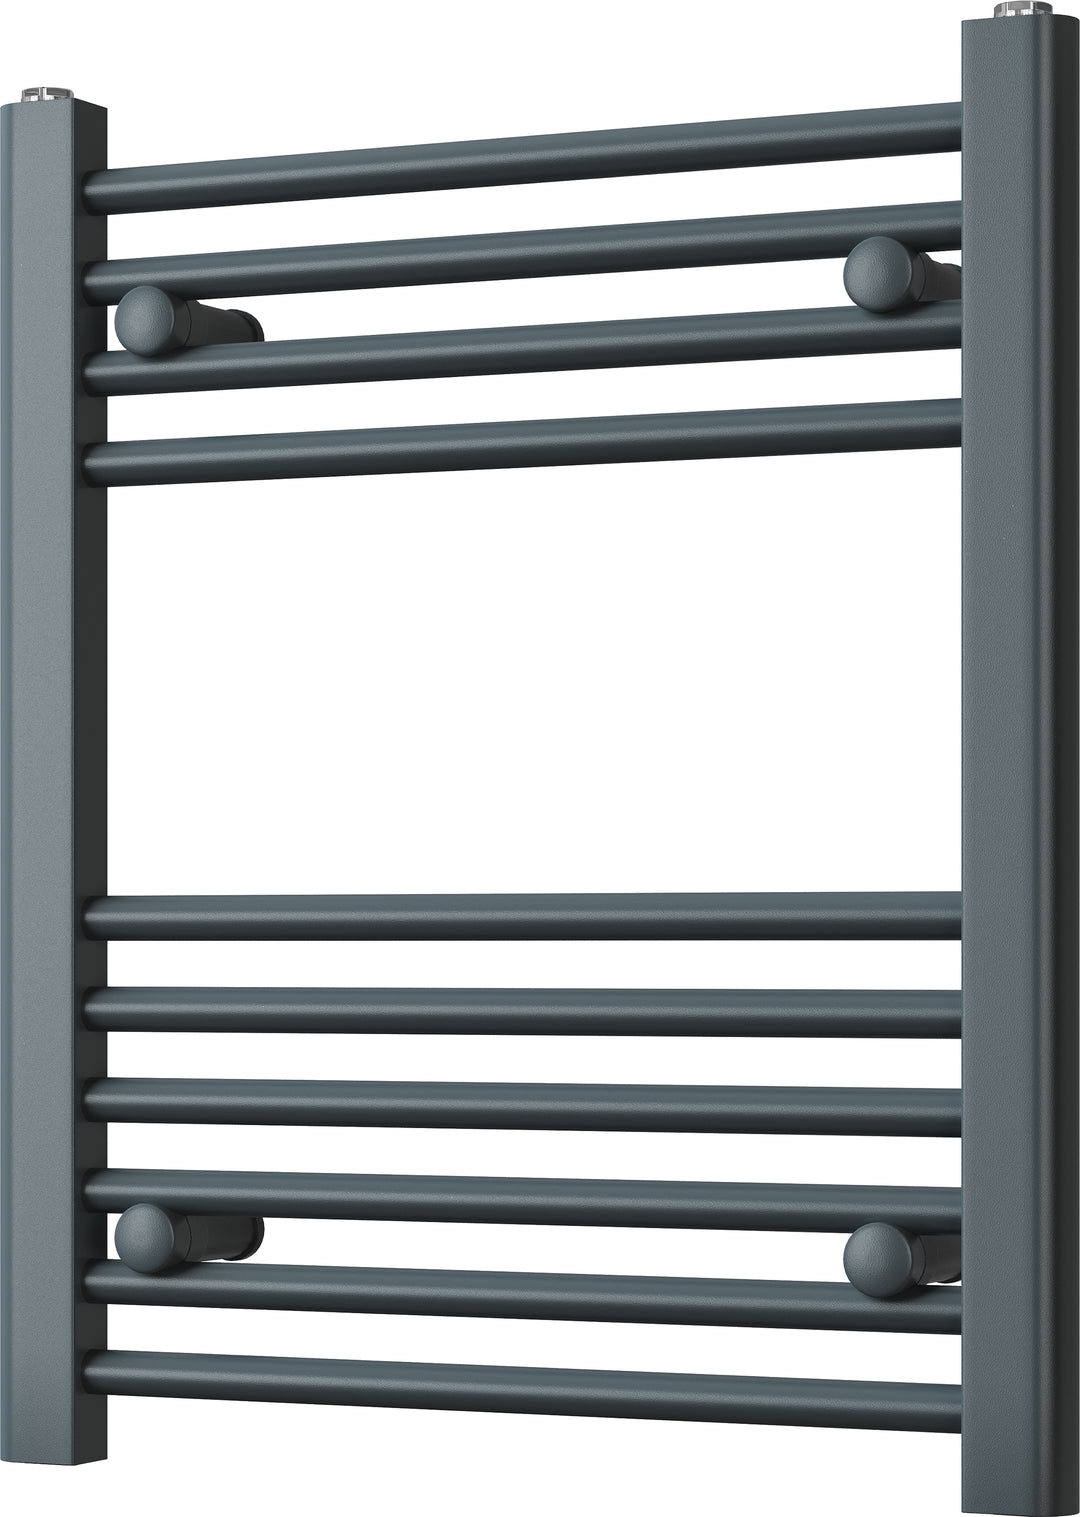 Zennor - Anthracite Heated Towel Rail - H600mm x W500mm - Straight